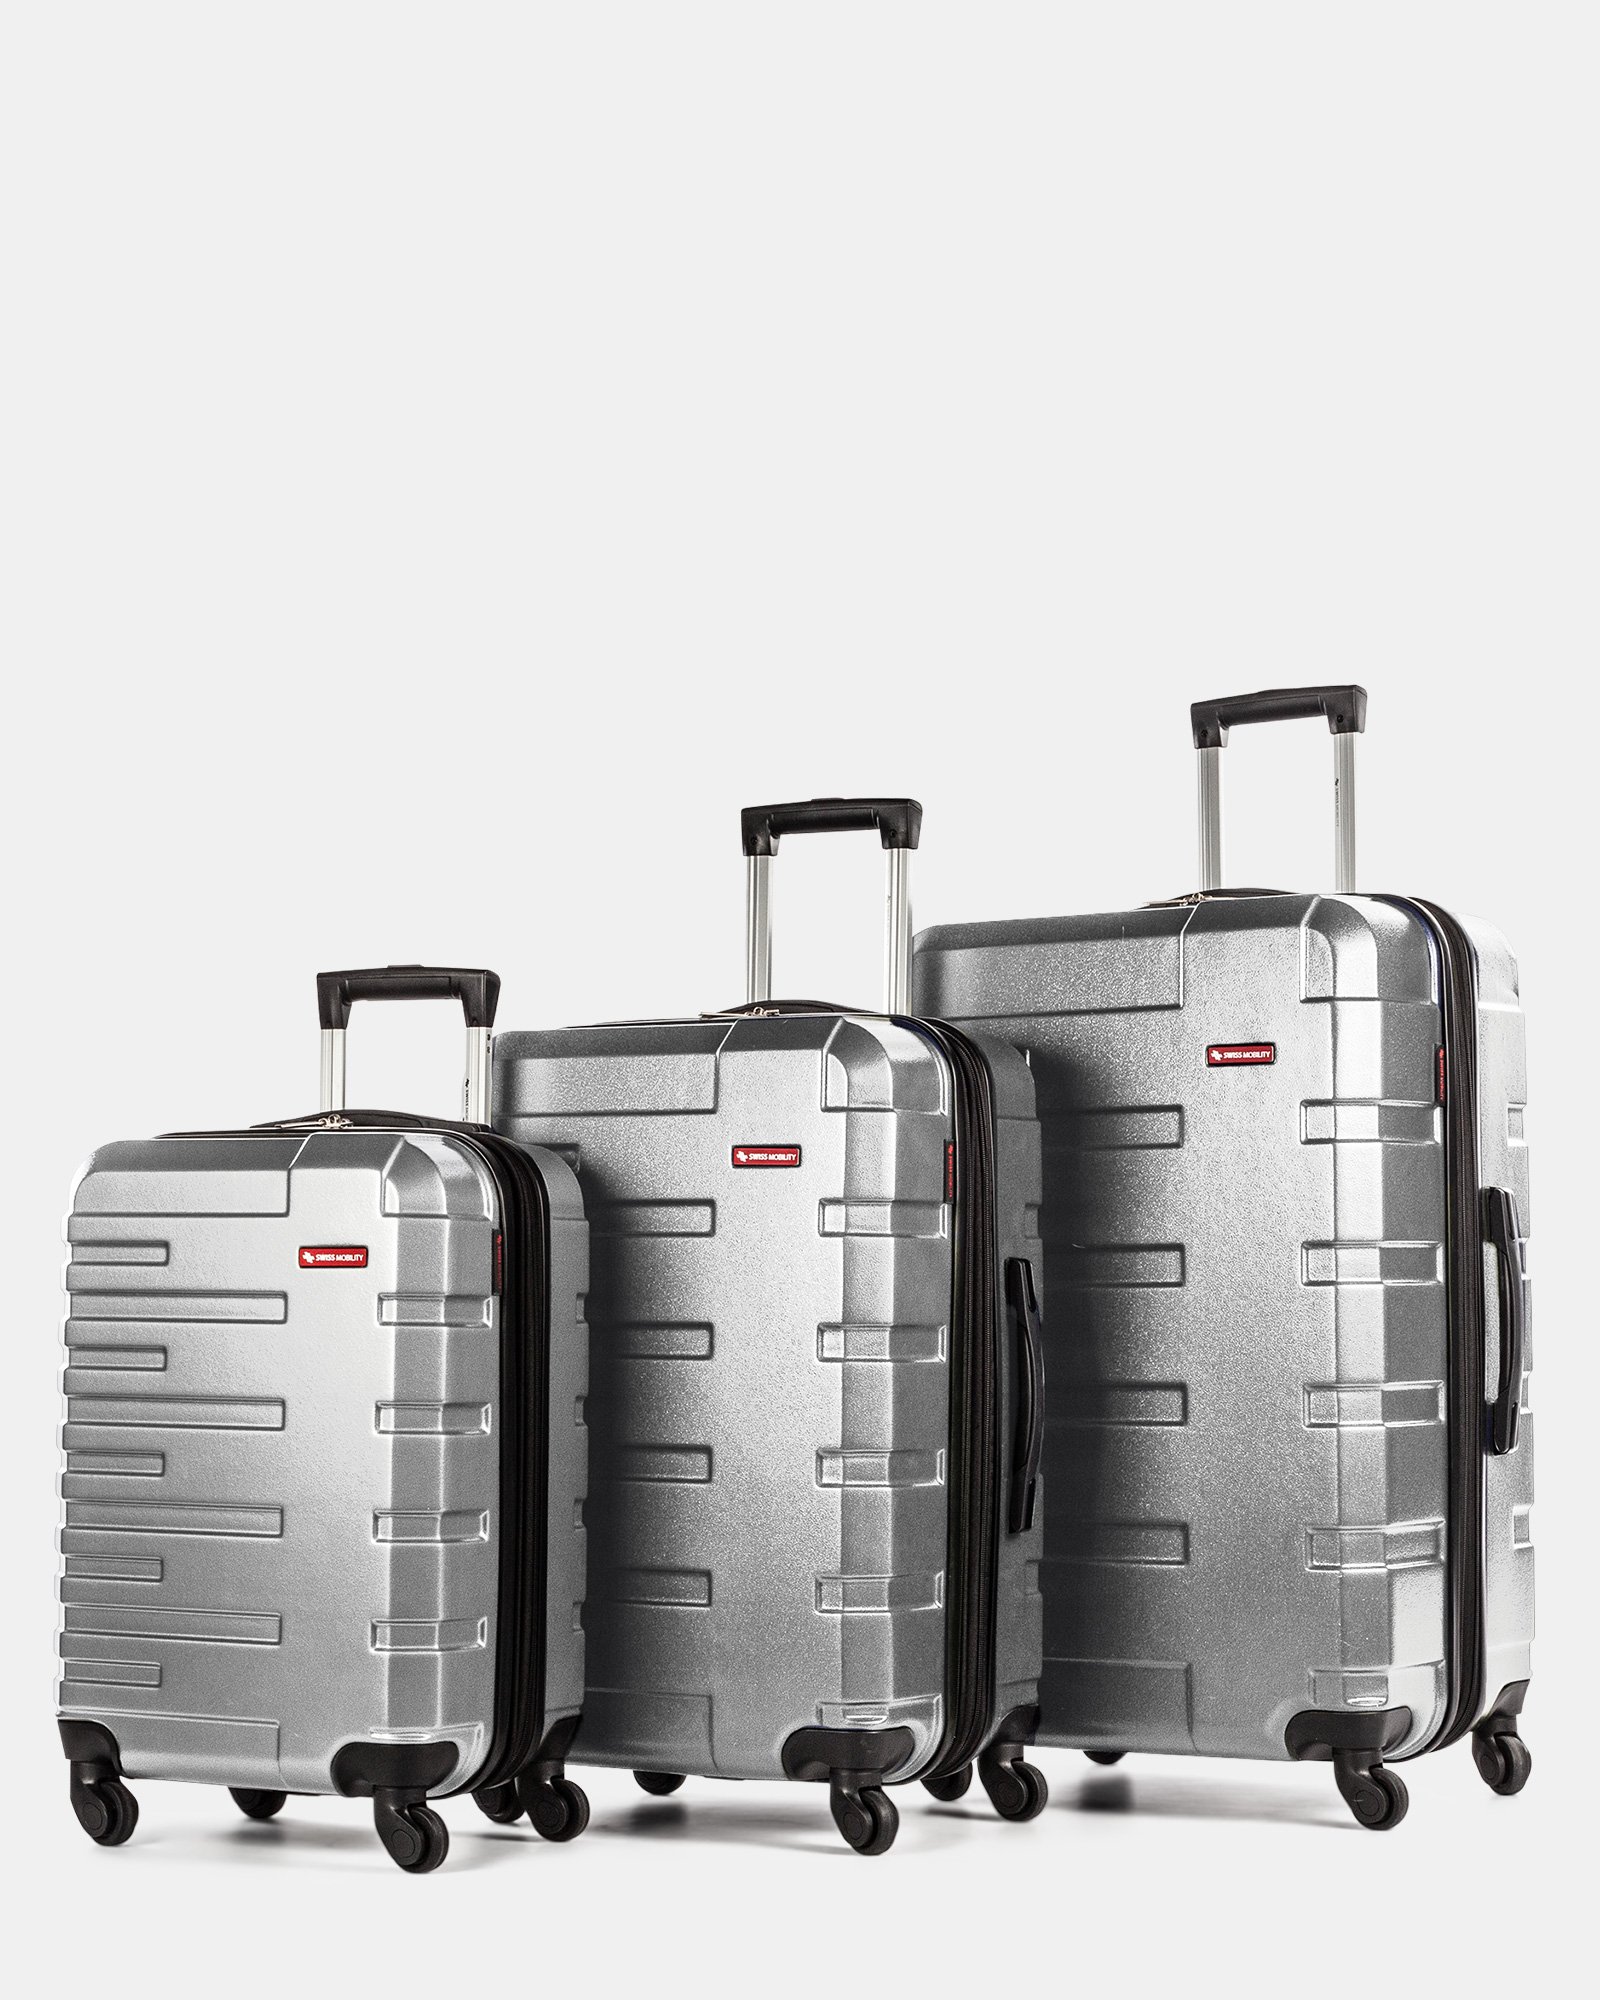 Things to Consider When Buying a Good Suite Case